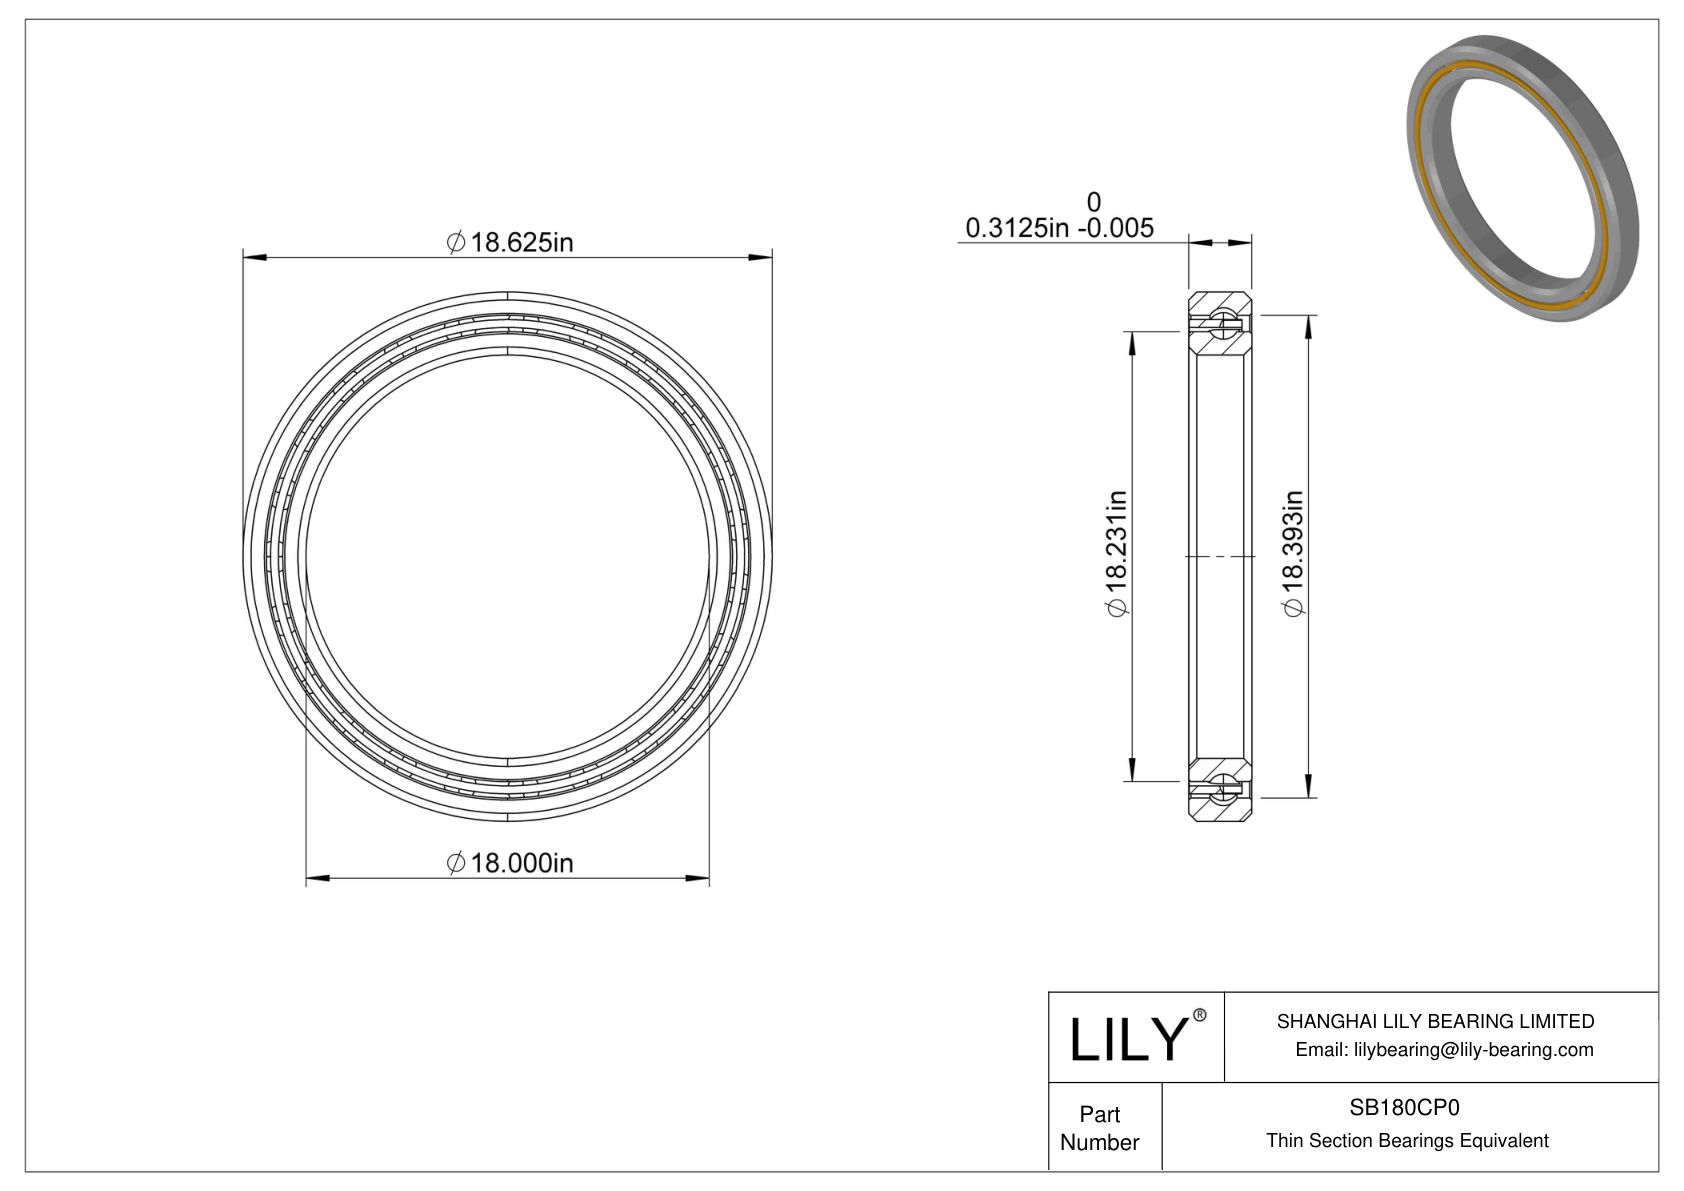 SB180CP0 Constant Section (CS) Bearings cad drawing